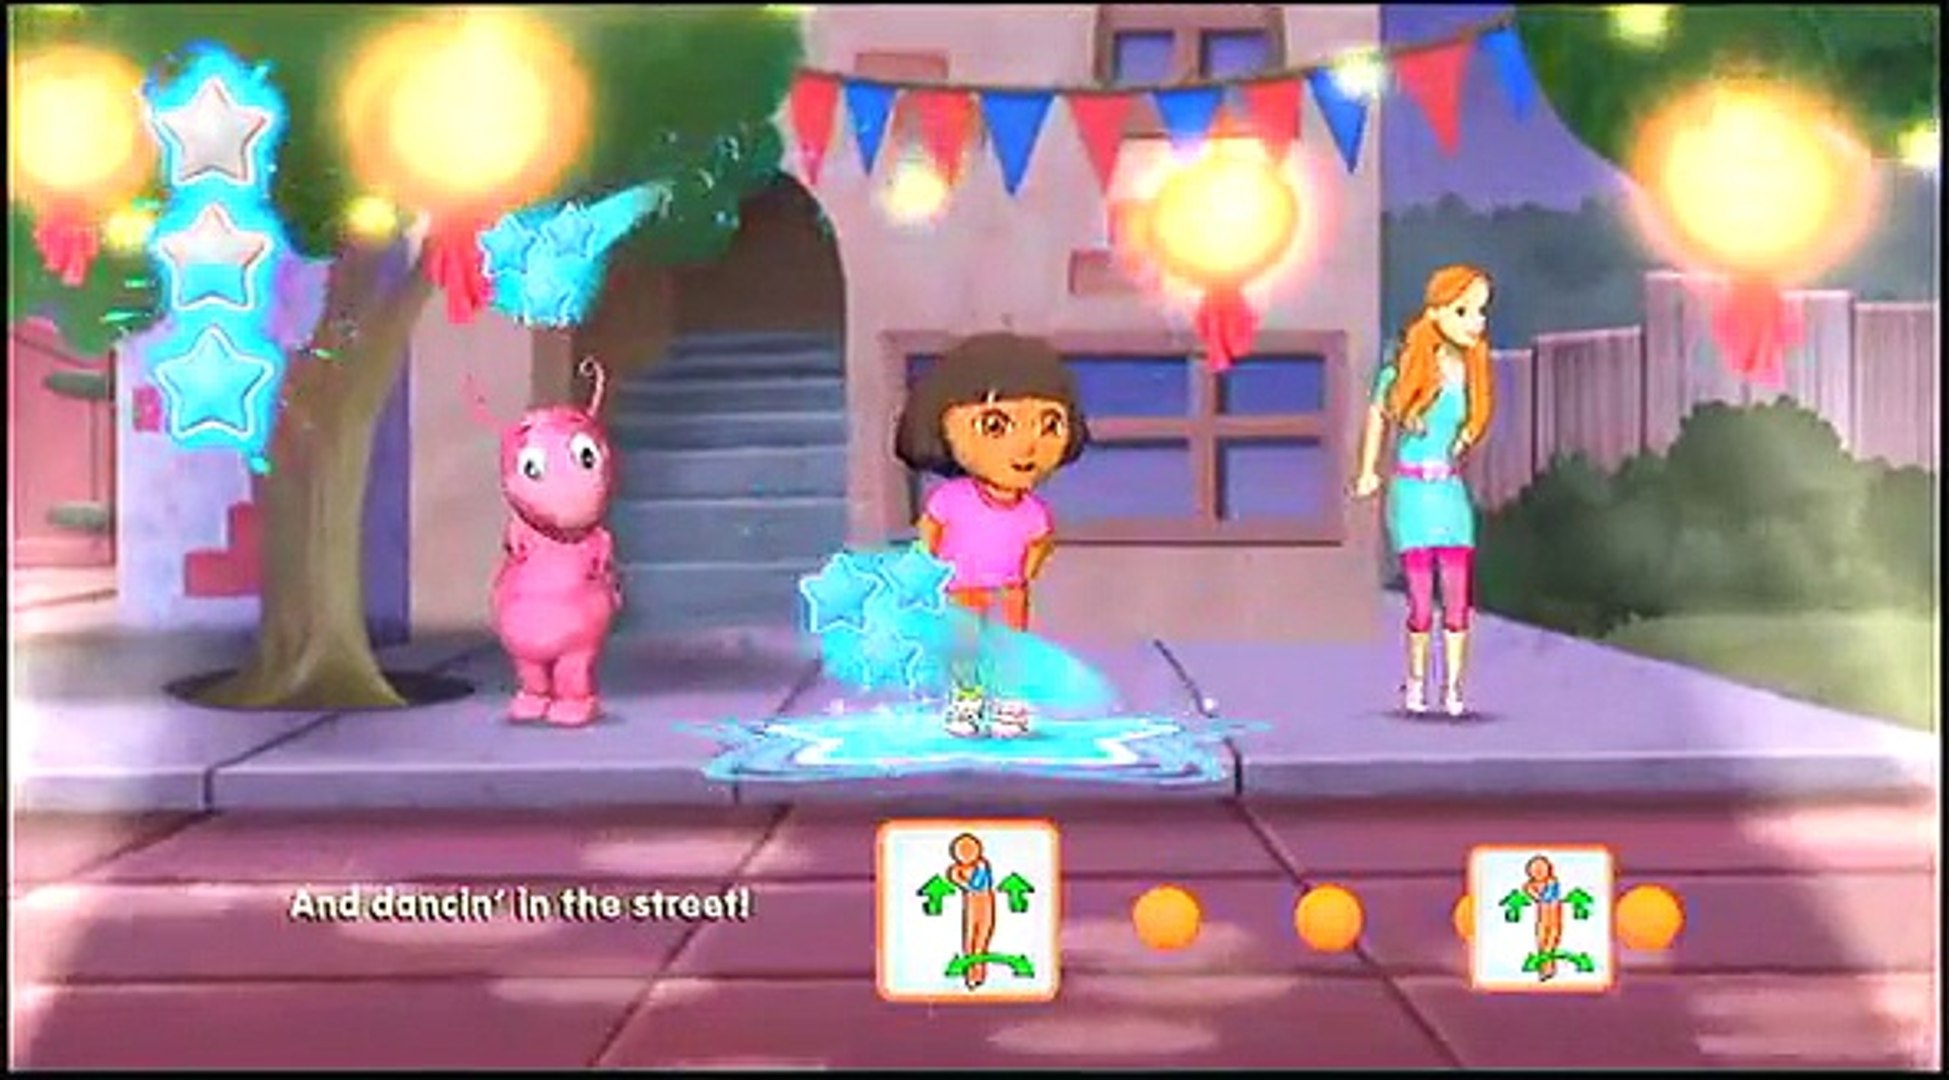 Dancing In the Street - Nickelodeon Dance - Wii Workouts - video Dailymotion